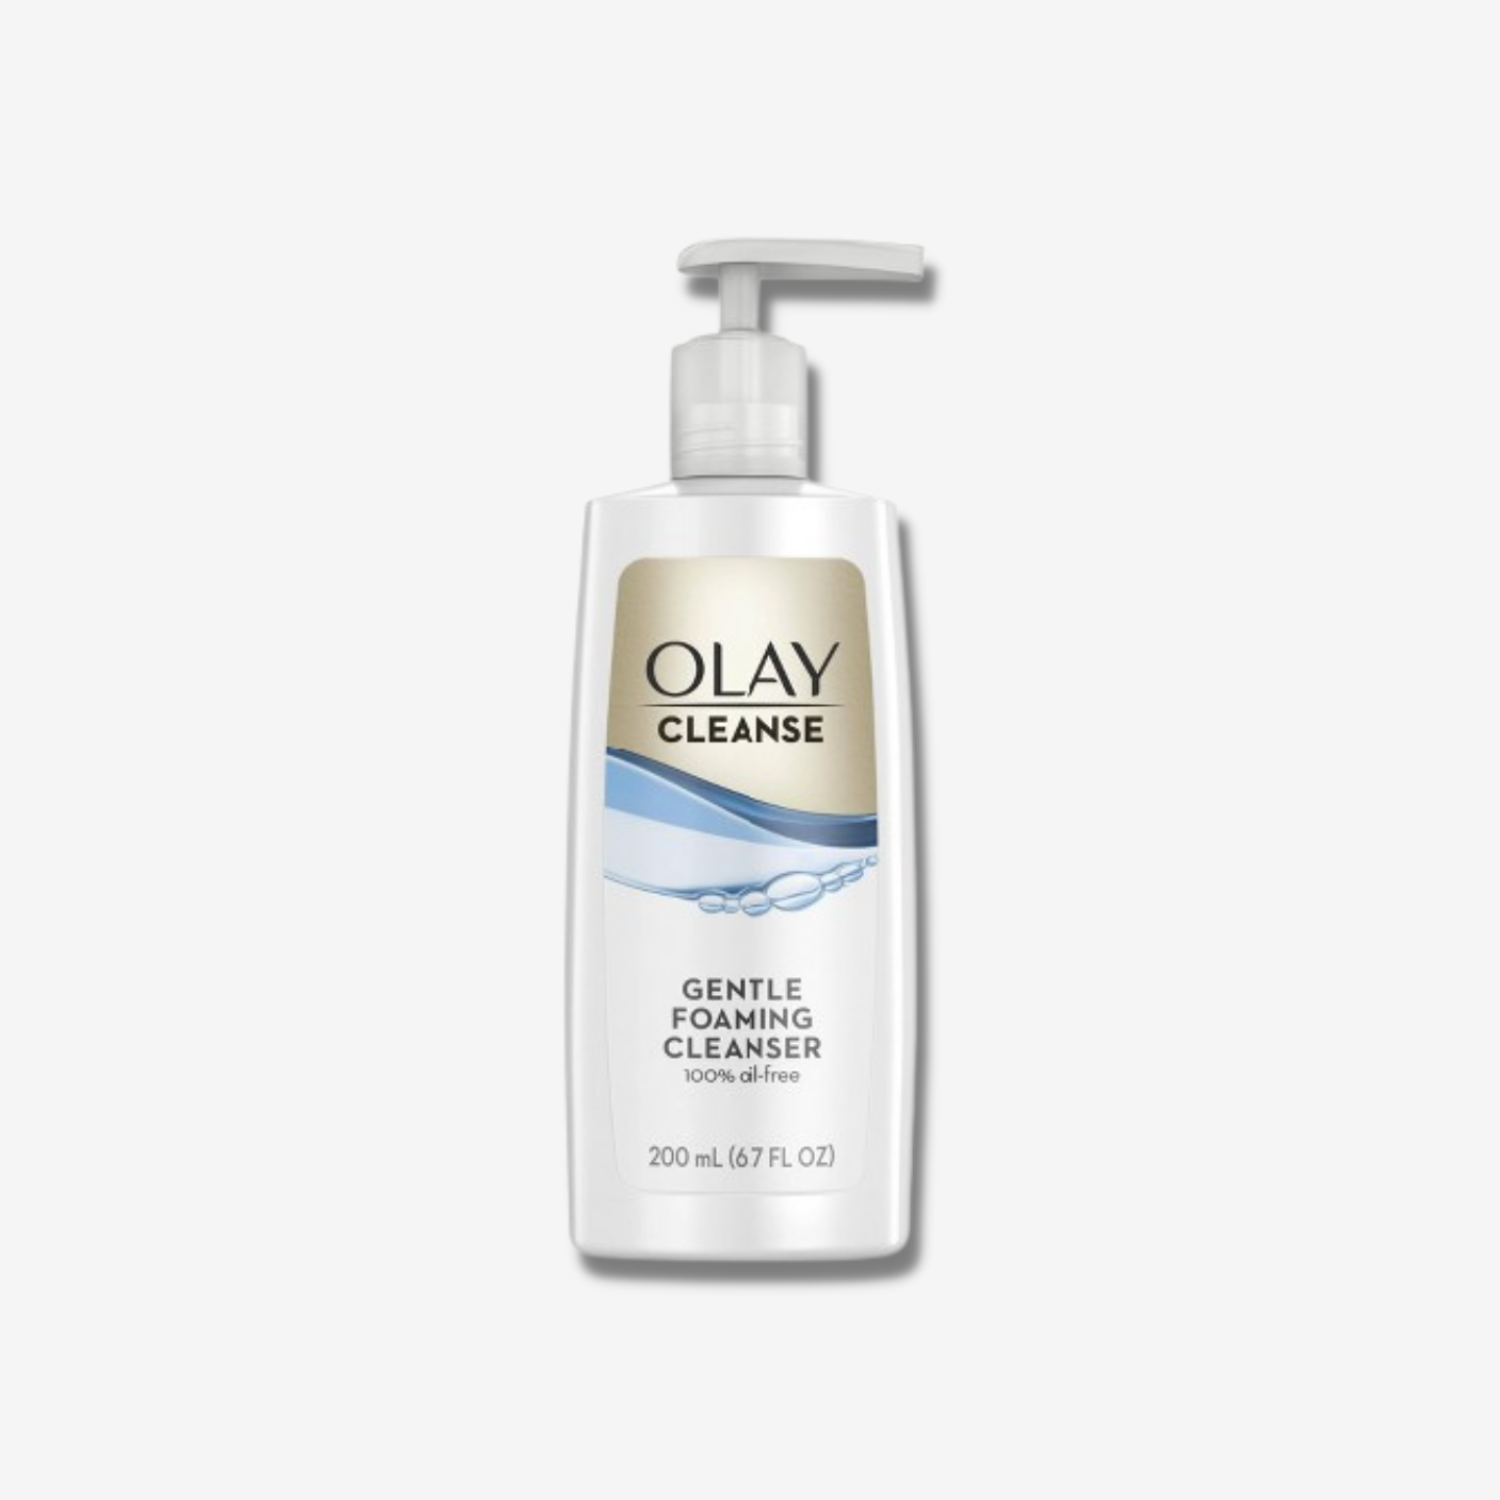 Olay Cleanse Gentle Foaming Cleanser